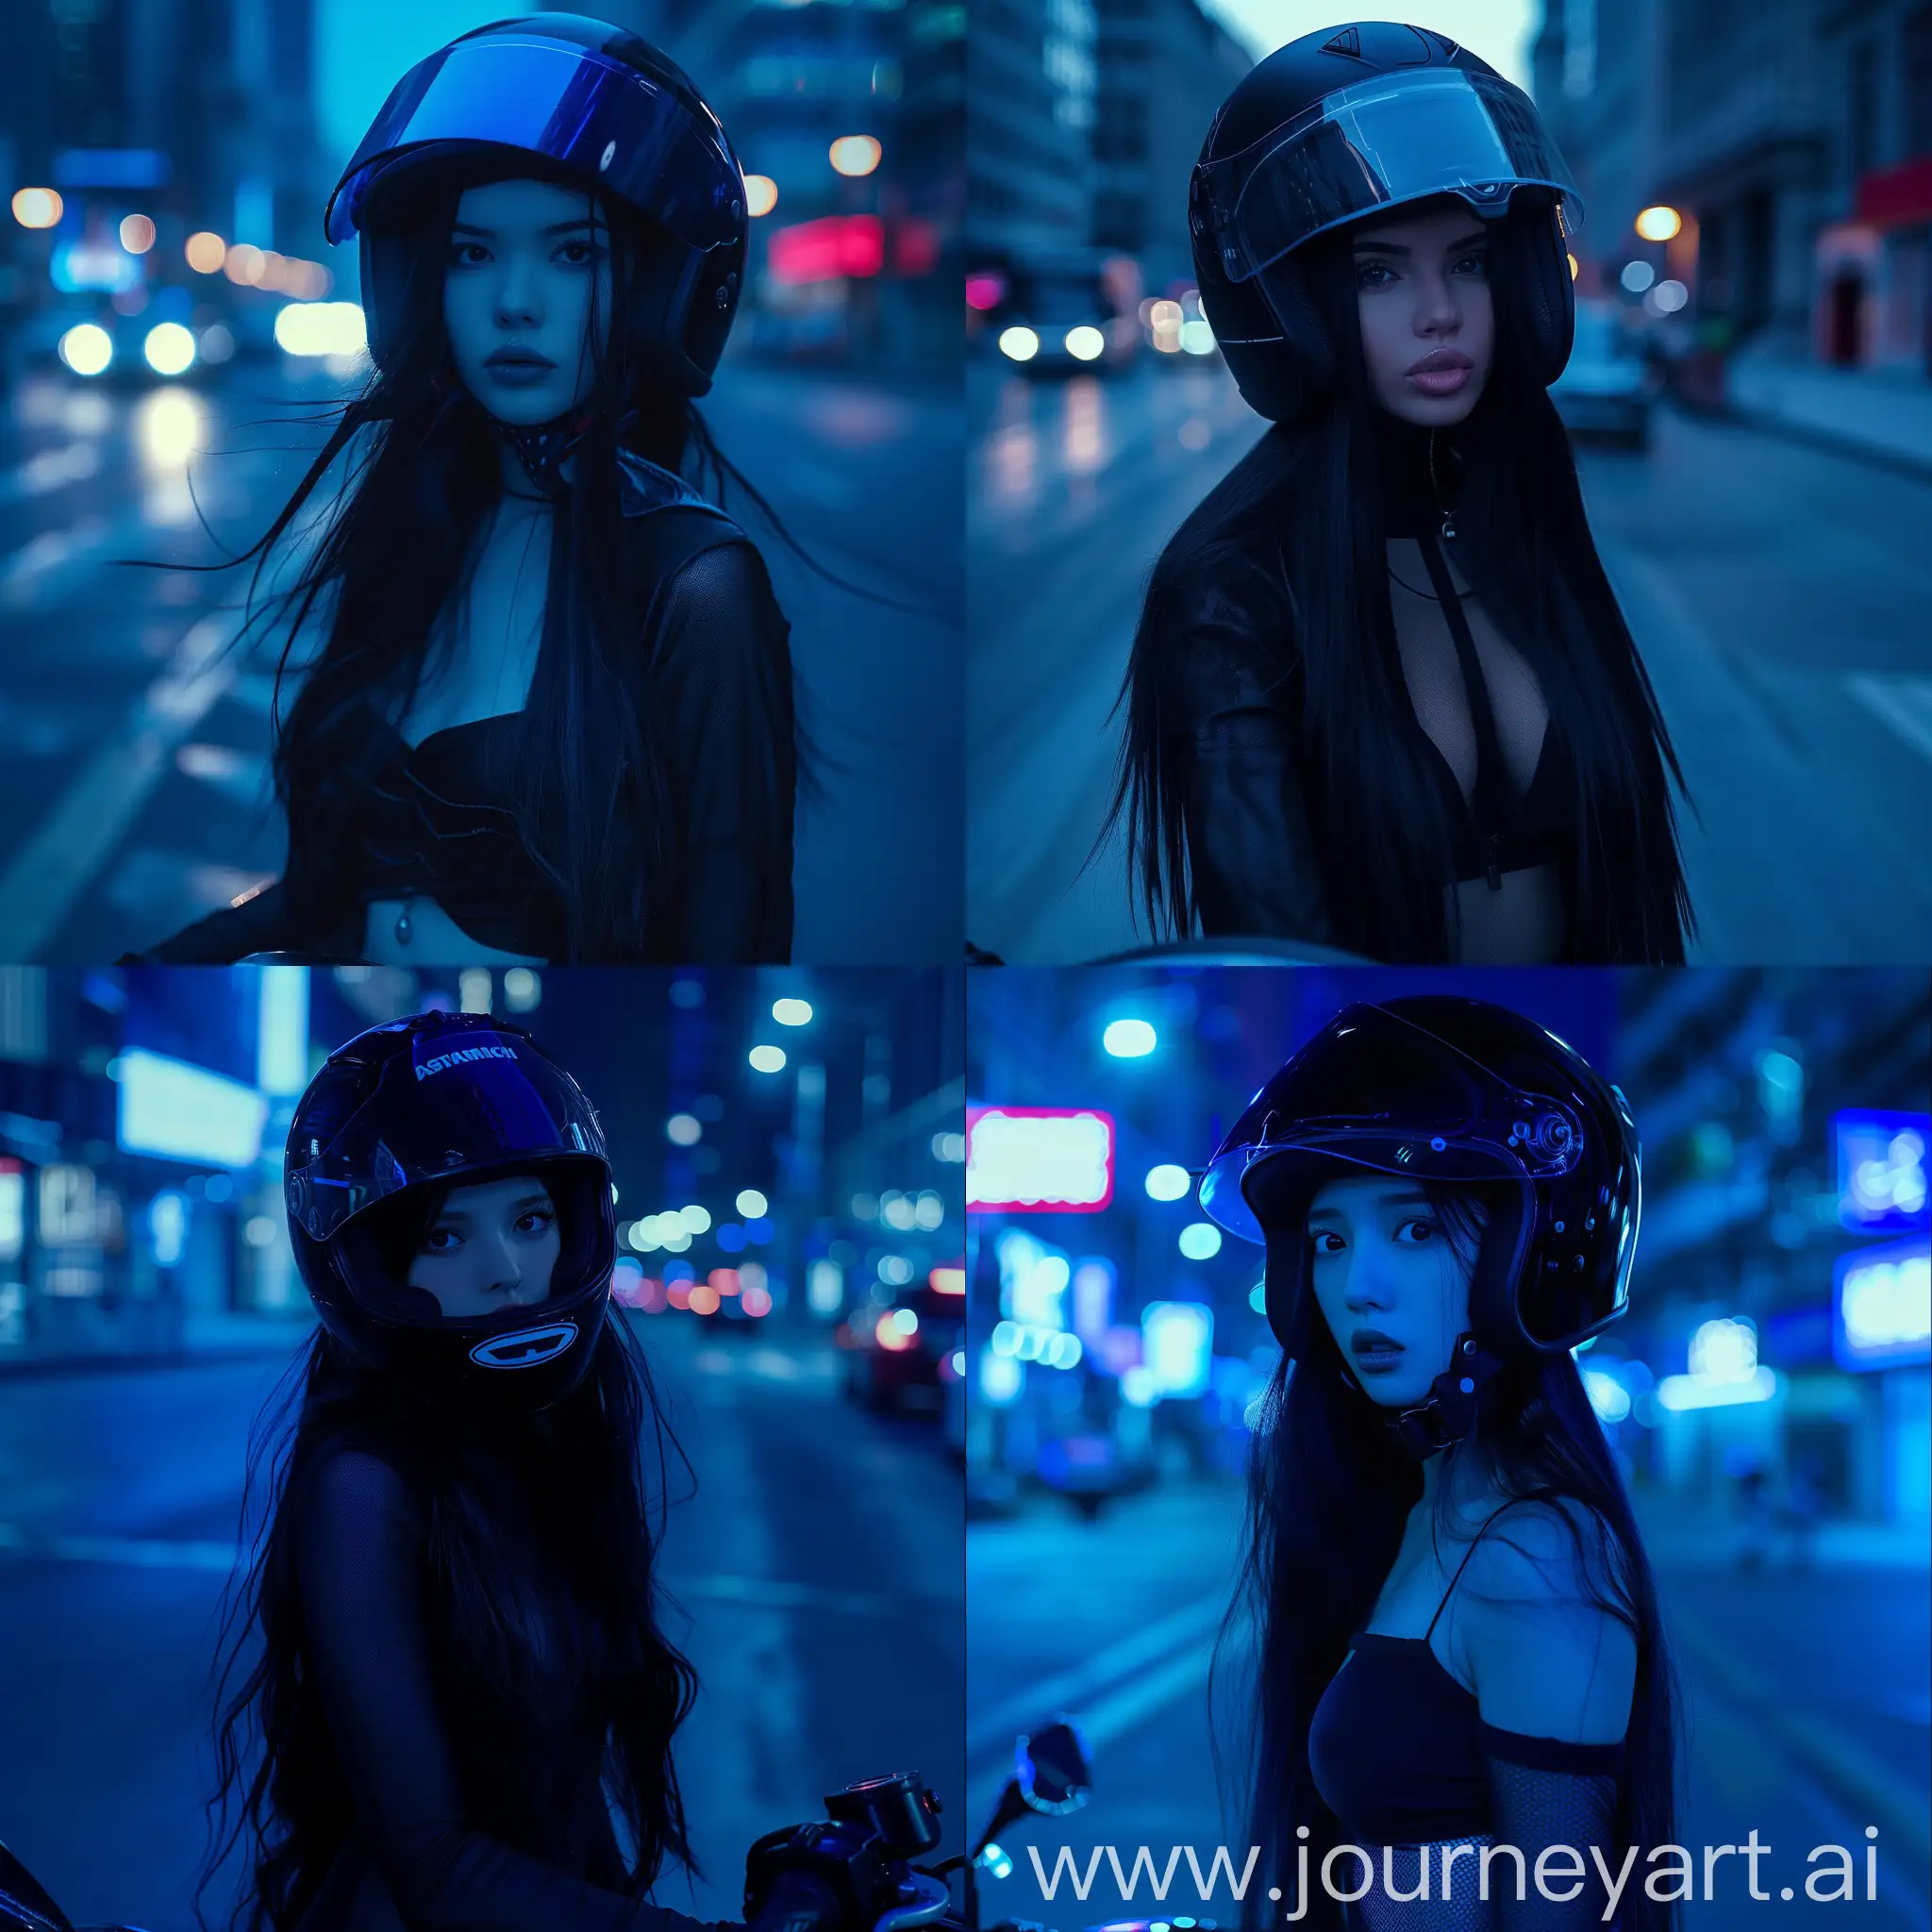 Aesthetic instagram picture real person, girl with long black hair wearing motorcycle helmet, dark blue lighting, blurry city street in background, skin tight black clothes